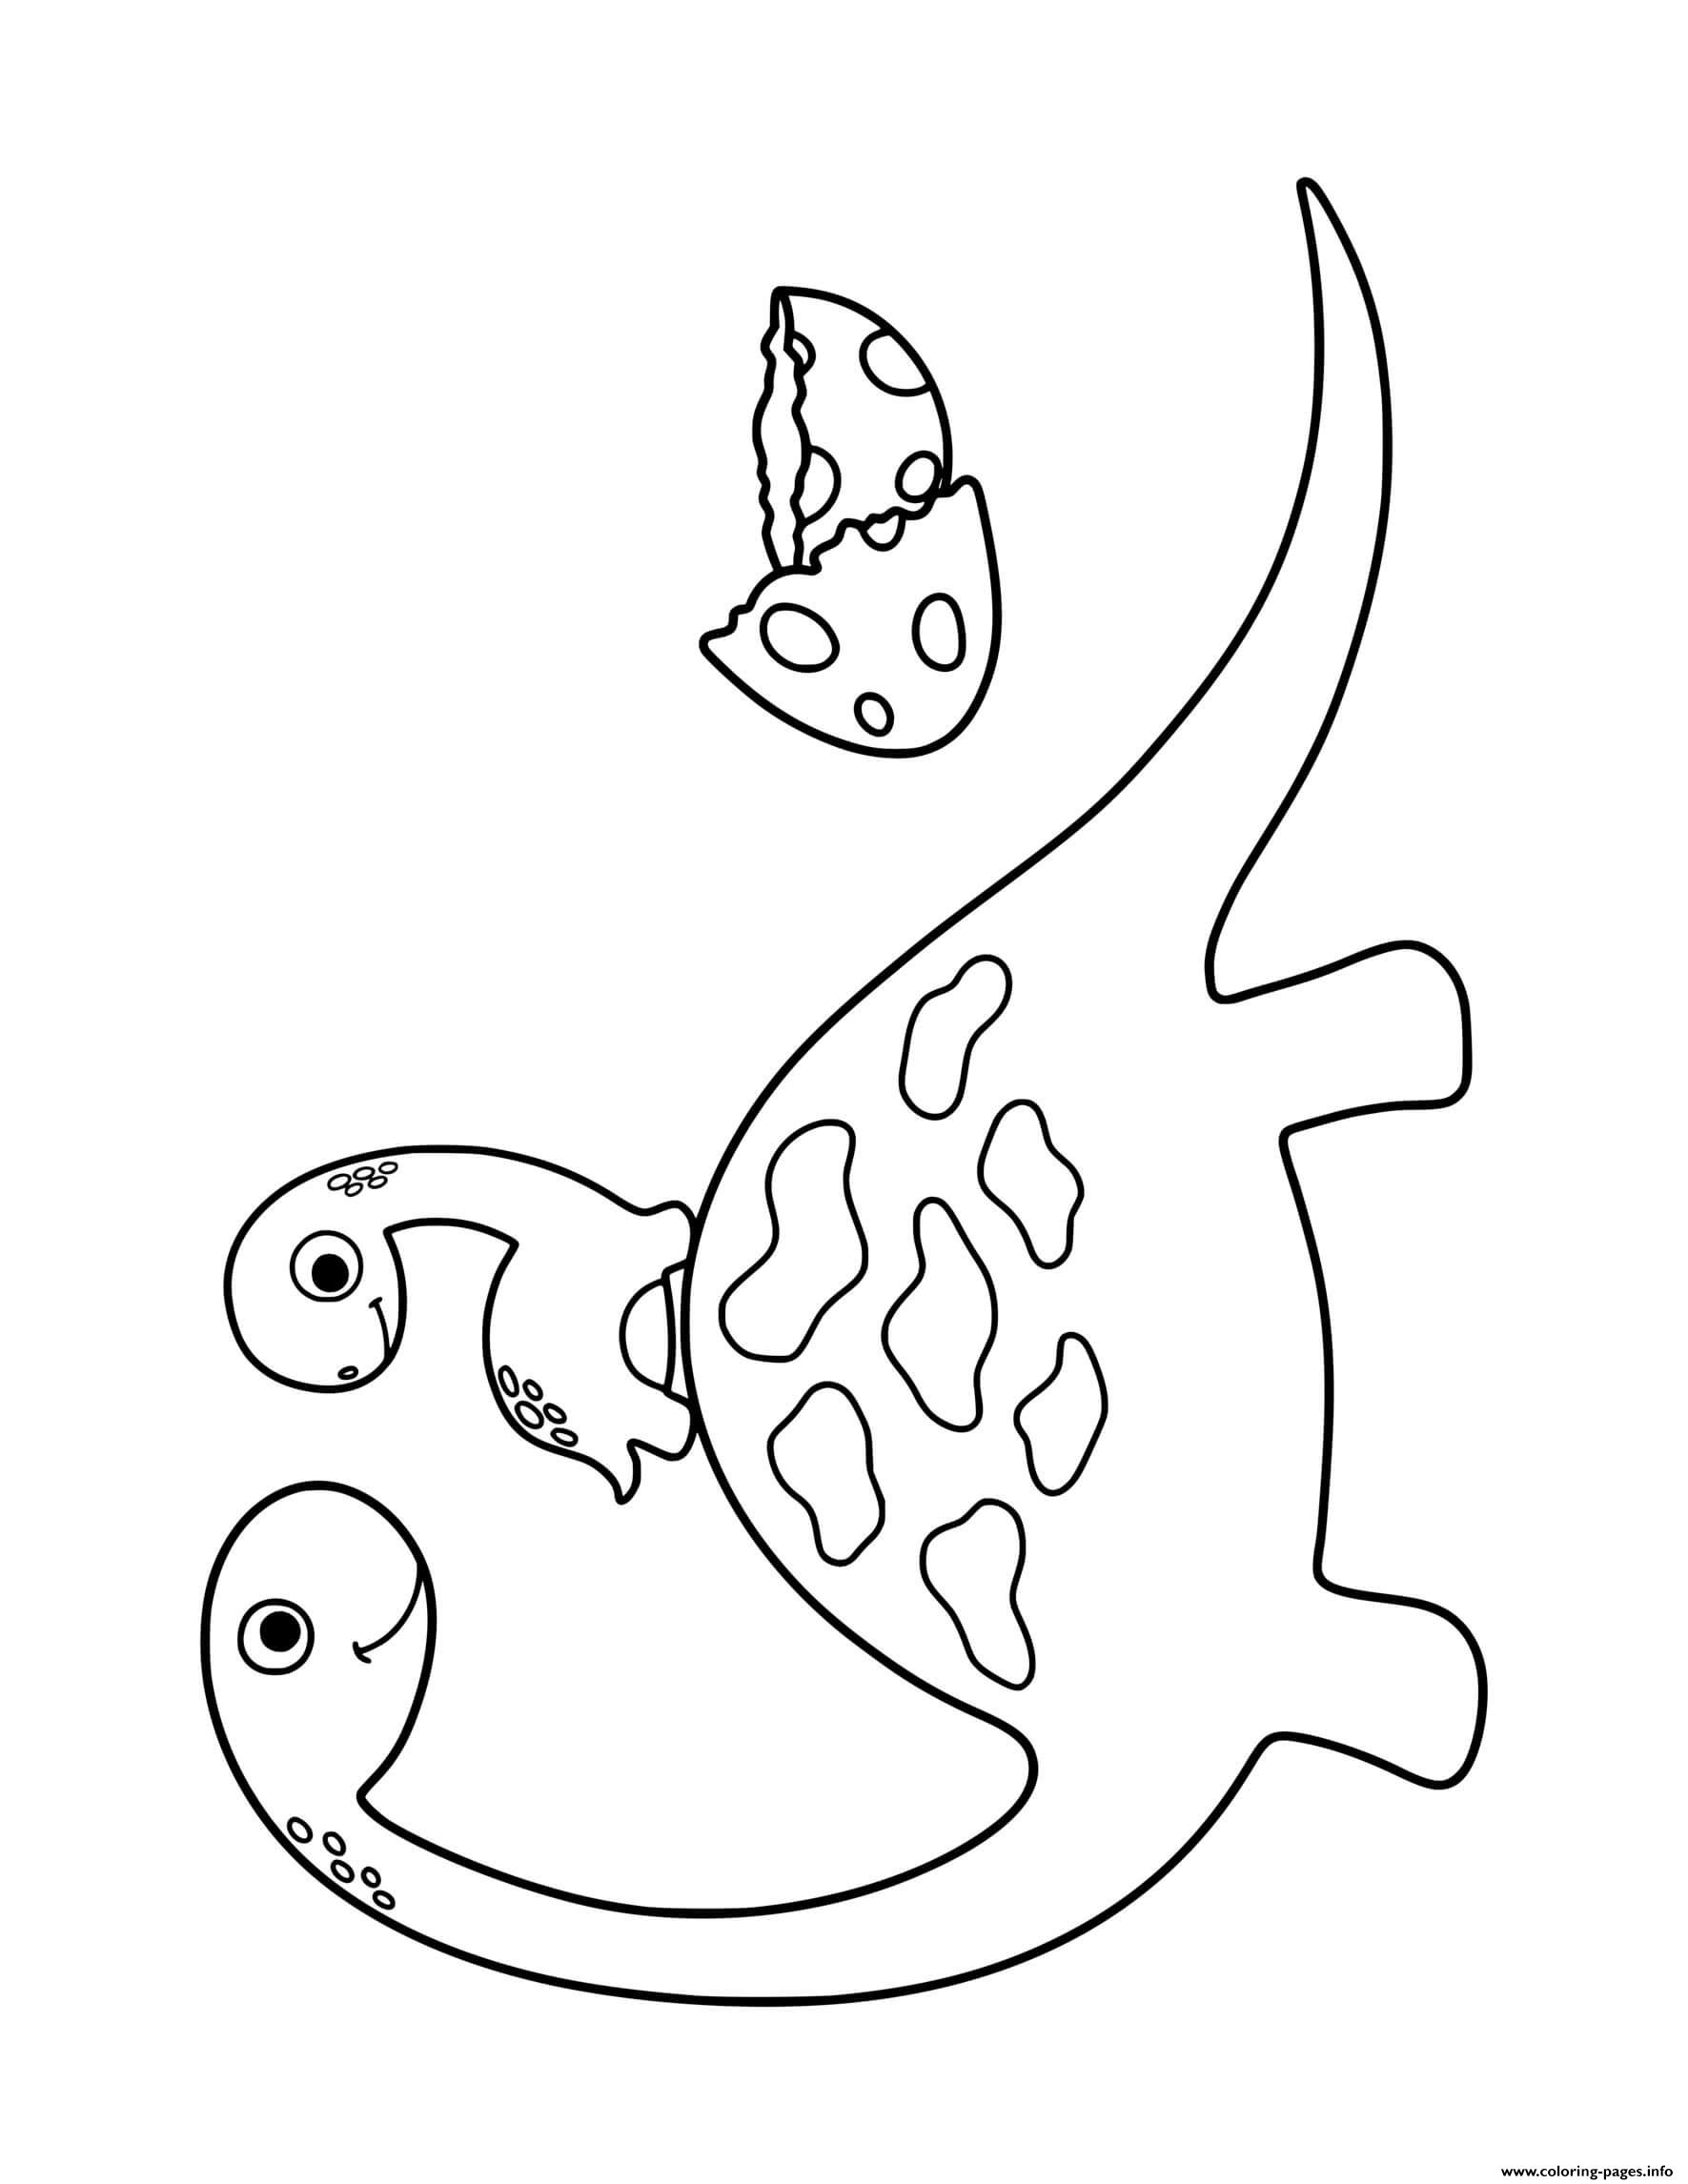 Dinosaur Mom With Baby Dinosaur For Preschoolers Coloring Pages Printable